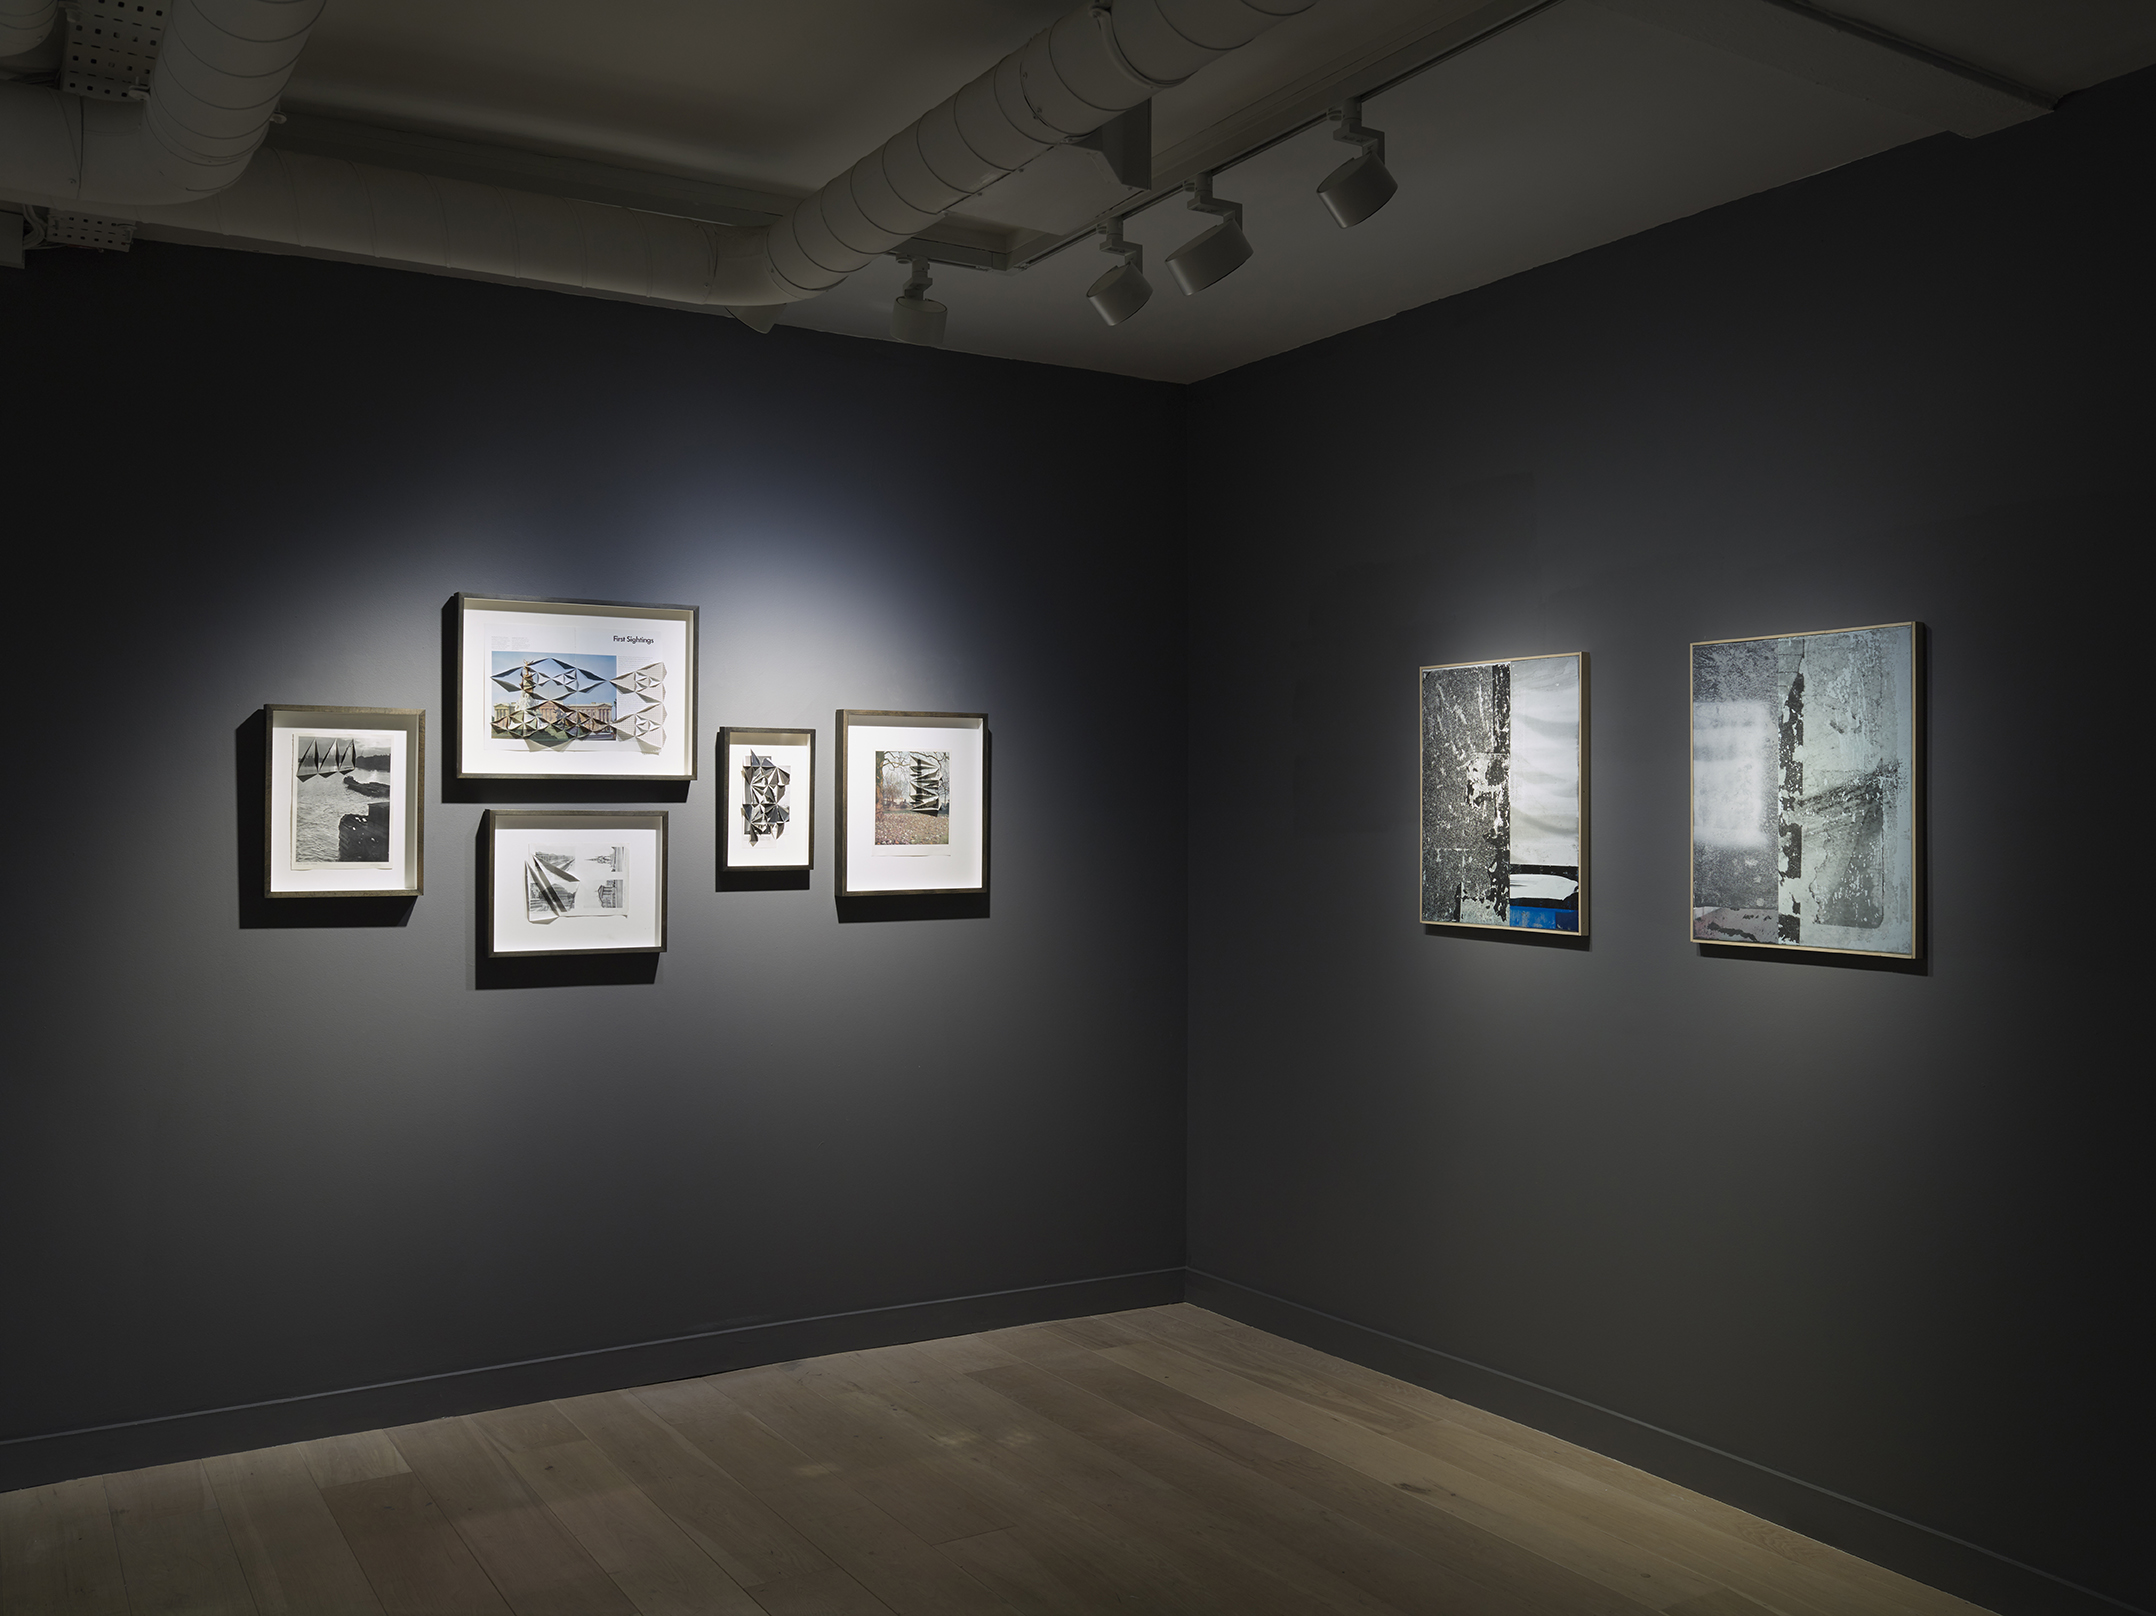  L-R Works by Abigail Reynolds and Mike Ballard. Photo: Peter Mallet 